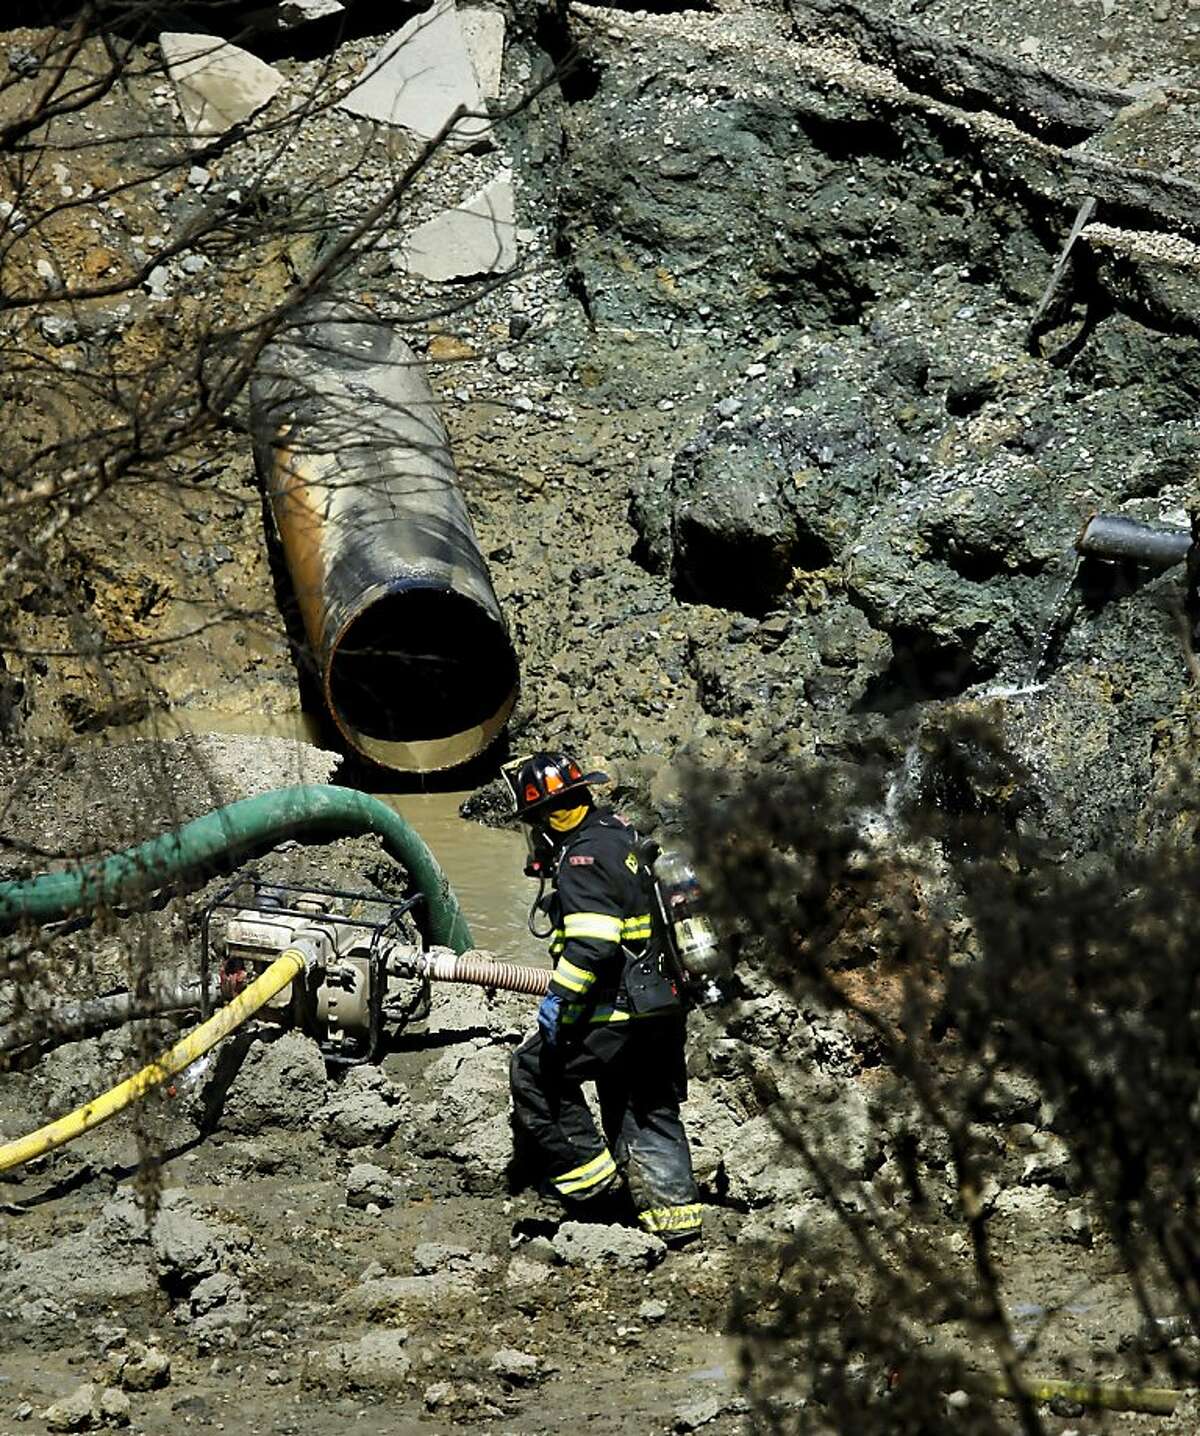 A firefighter at the blast site where the hugh natural gas line in now exposed inside a large crater on Friday Sept. 10, 2010, in which an explosion and fire leveled the surrounding neighborhood the night before in San Bruno, Calif. Ran on: 09-11-2010 A firefighter at the San Bruno blast site views the natural-gas pipeline now exposed inside the crater the explosion caused. Ran on: 09-24-2010 A firefighter works at the site of the San Bruno gas line blast. Investigators are looking at microbes as a possible cause. Ran on: 01-14-2011 The blast site in San Bruno where the huge natural gas pipeline exploded in September. Ran on: 06-29-2011 A severed gas line sits at the site of the blast. An expert says records suggest fluctuating pressure could have weakened it. Ran on: 06-29-2011 A severed gas line sits at the site of the blast. An expert says records suggest fluctuating pressure could have weakened it.